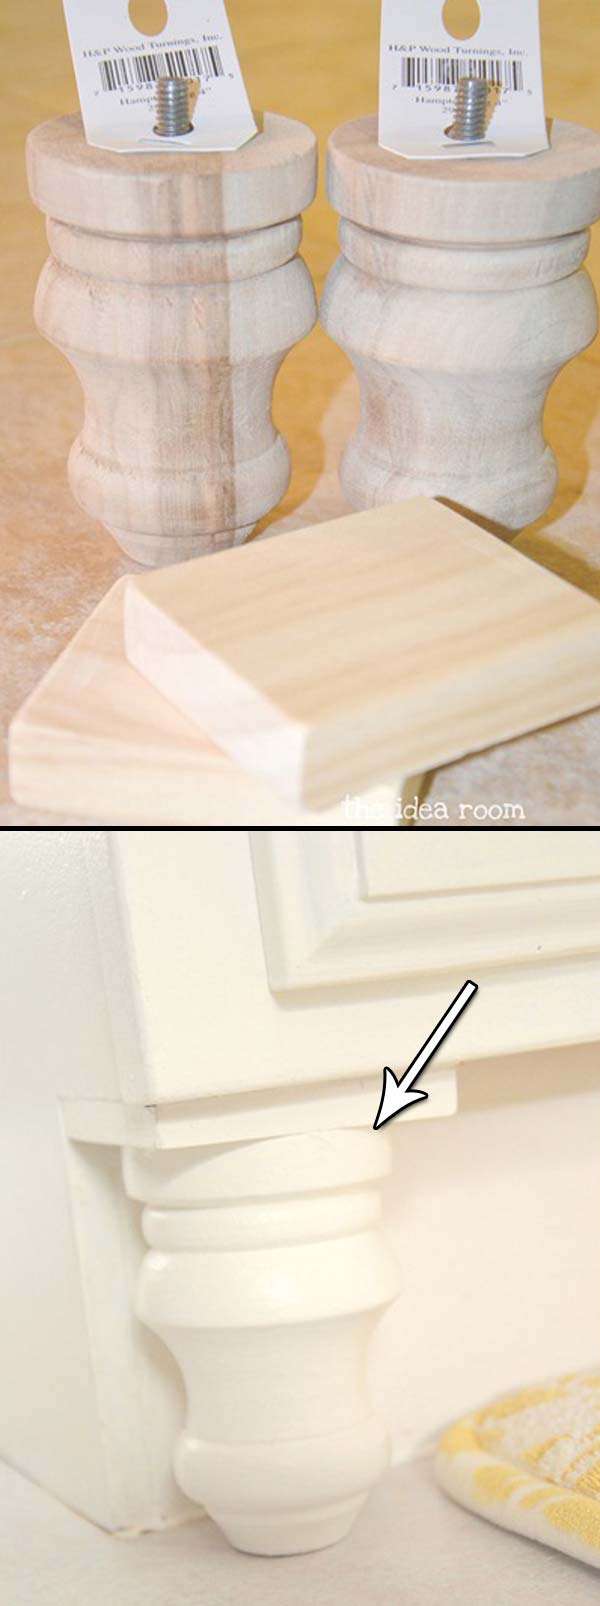 remodeling-projects-by-adding-molding-2